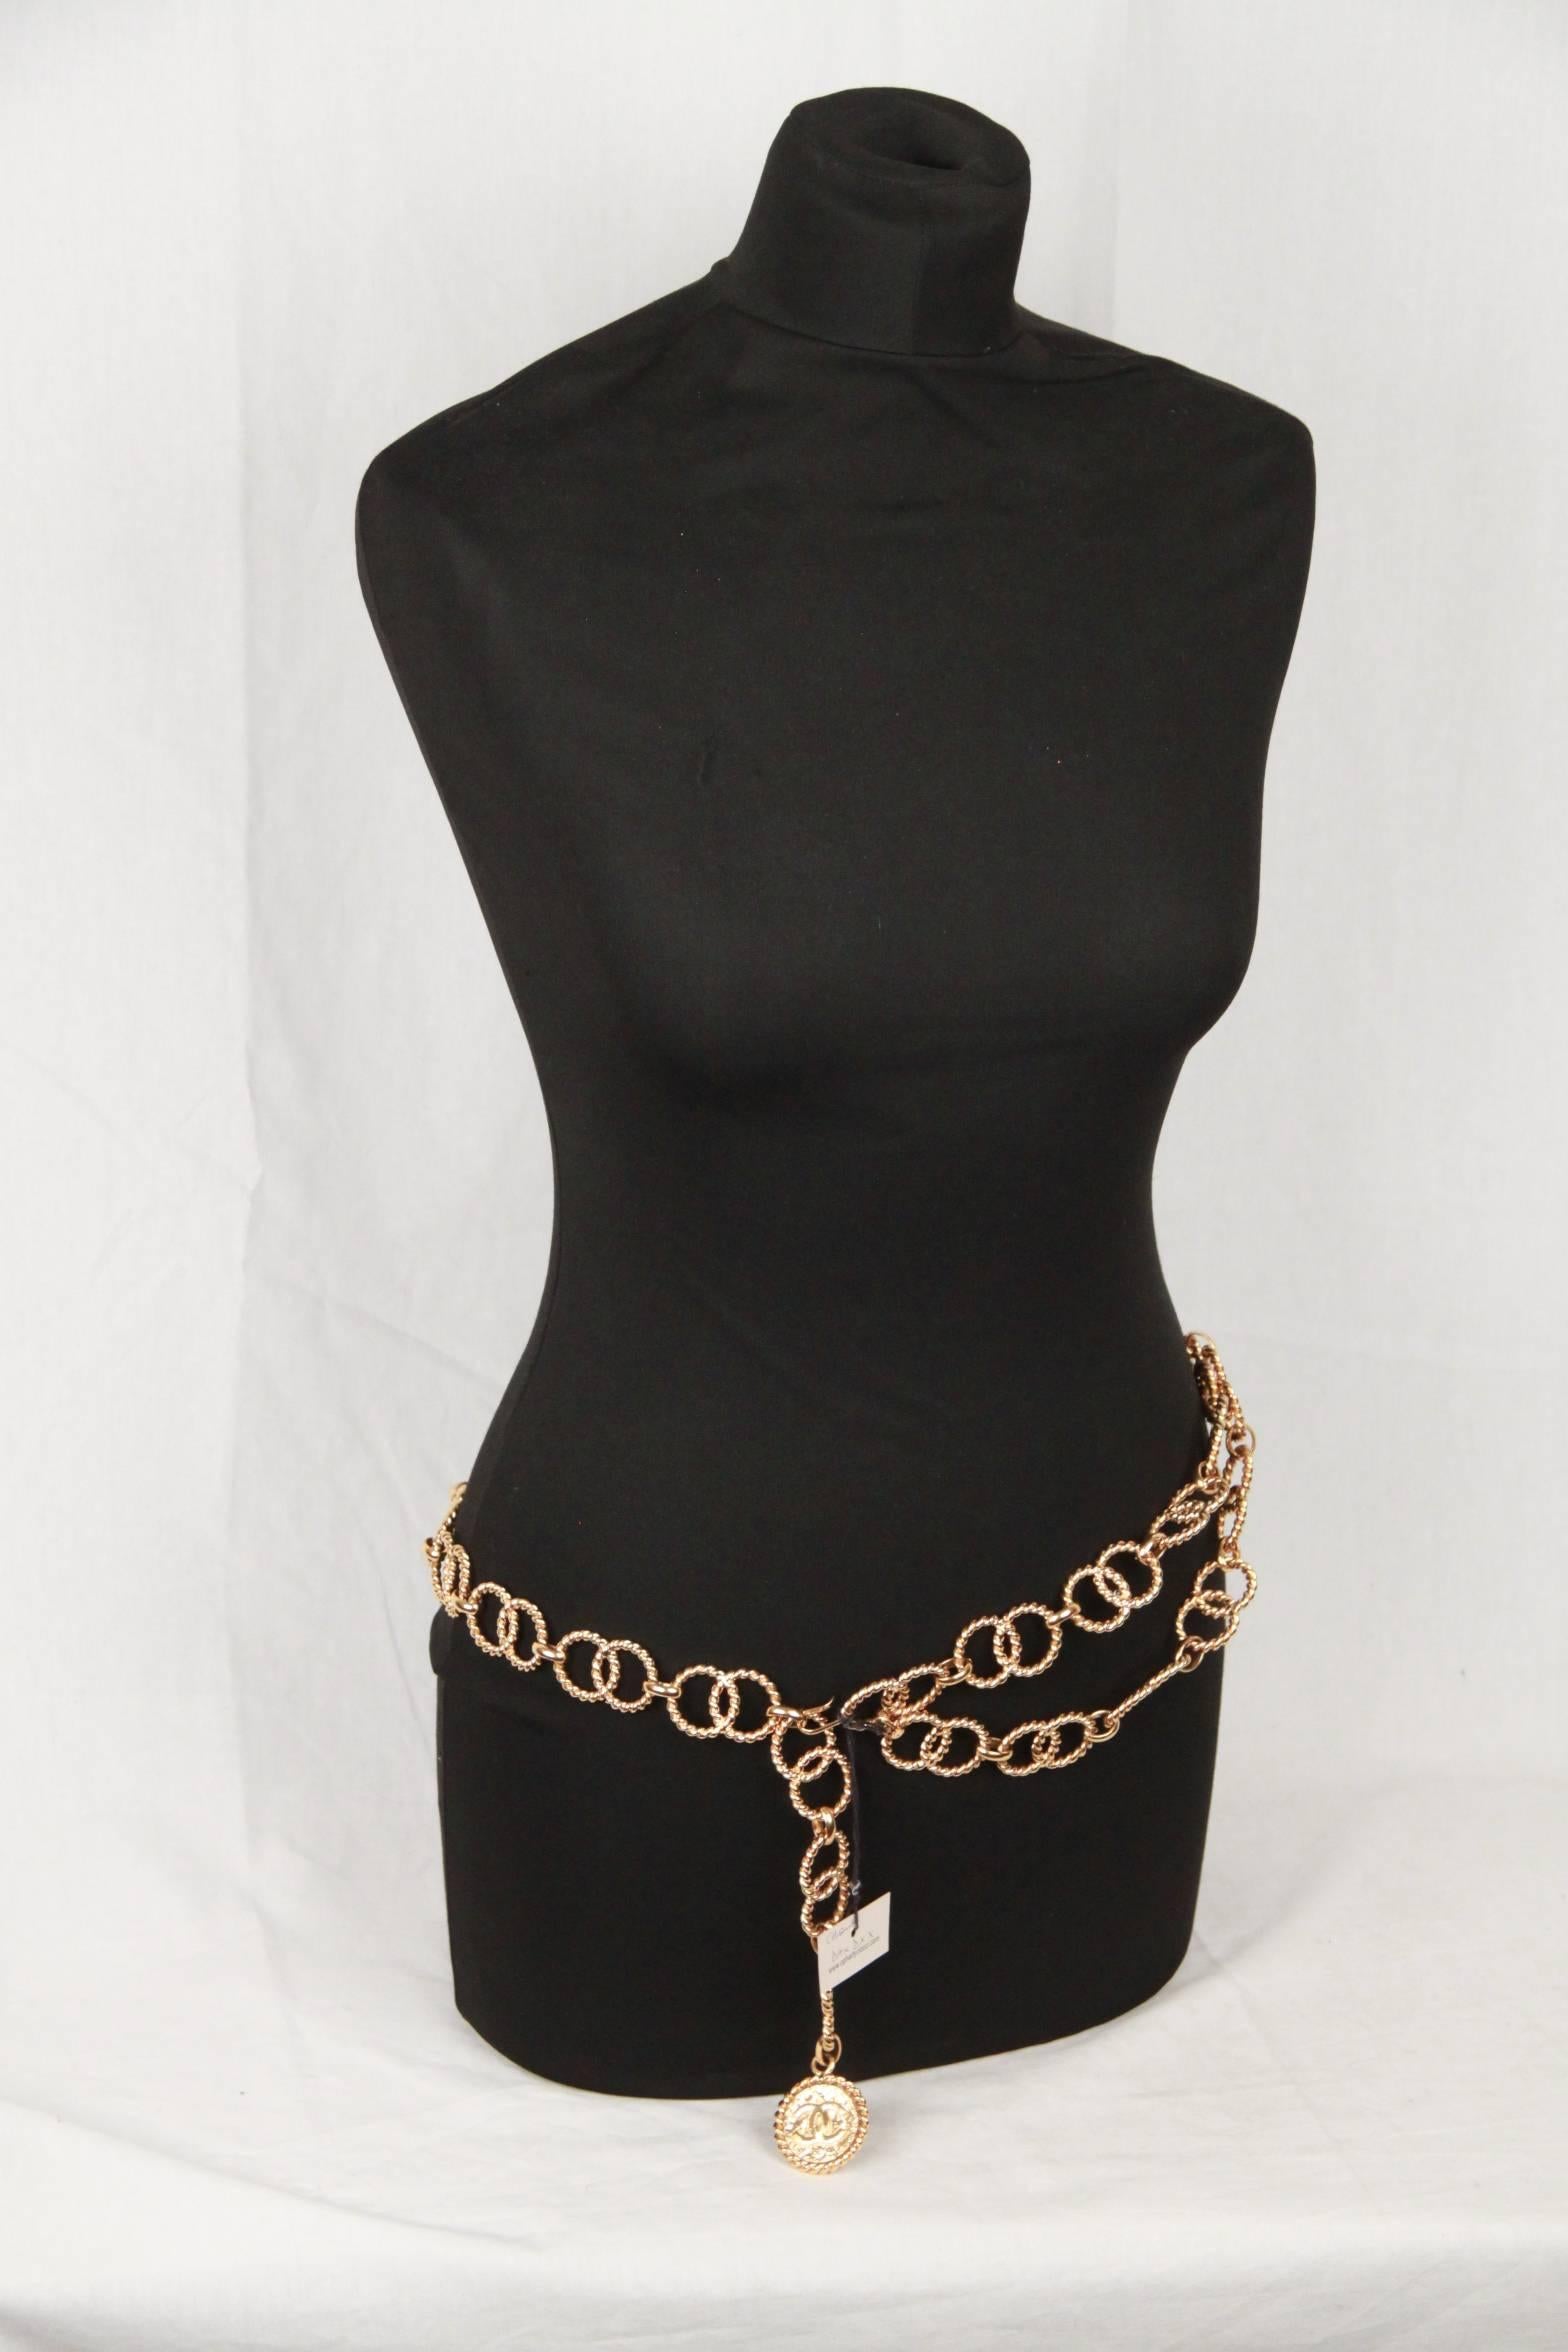 
Gold-tone Chanel multi-strand chain-link belt features larges interlocking rings. Double strand drop to sit at the waist with a single strand to clasp at the perfect spot for you. Gold metal round medallion/charm with interlocking CC at the end of